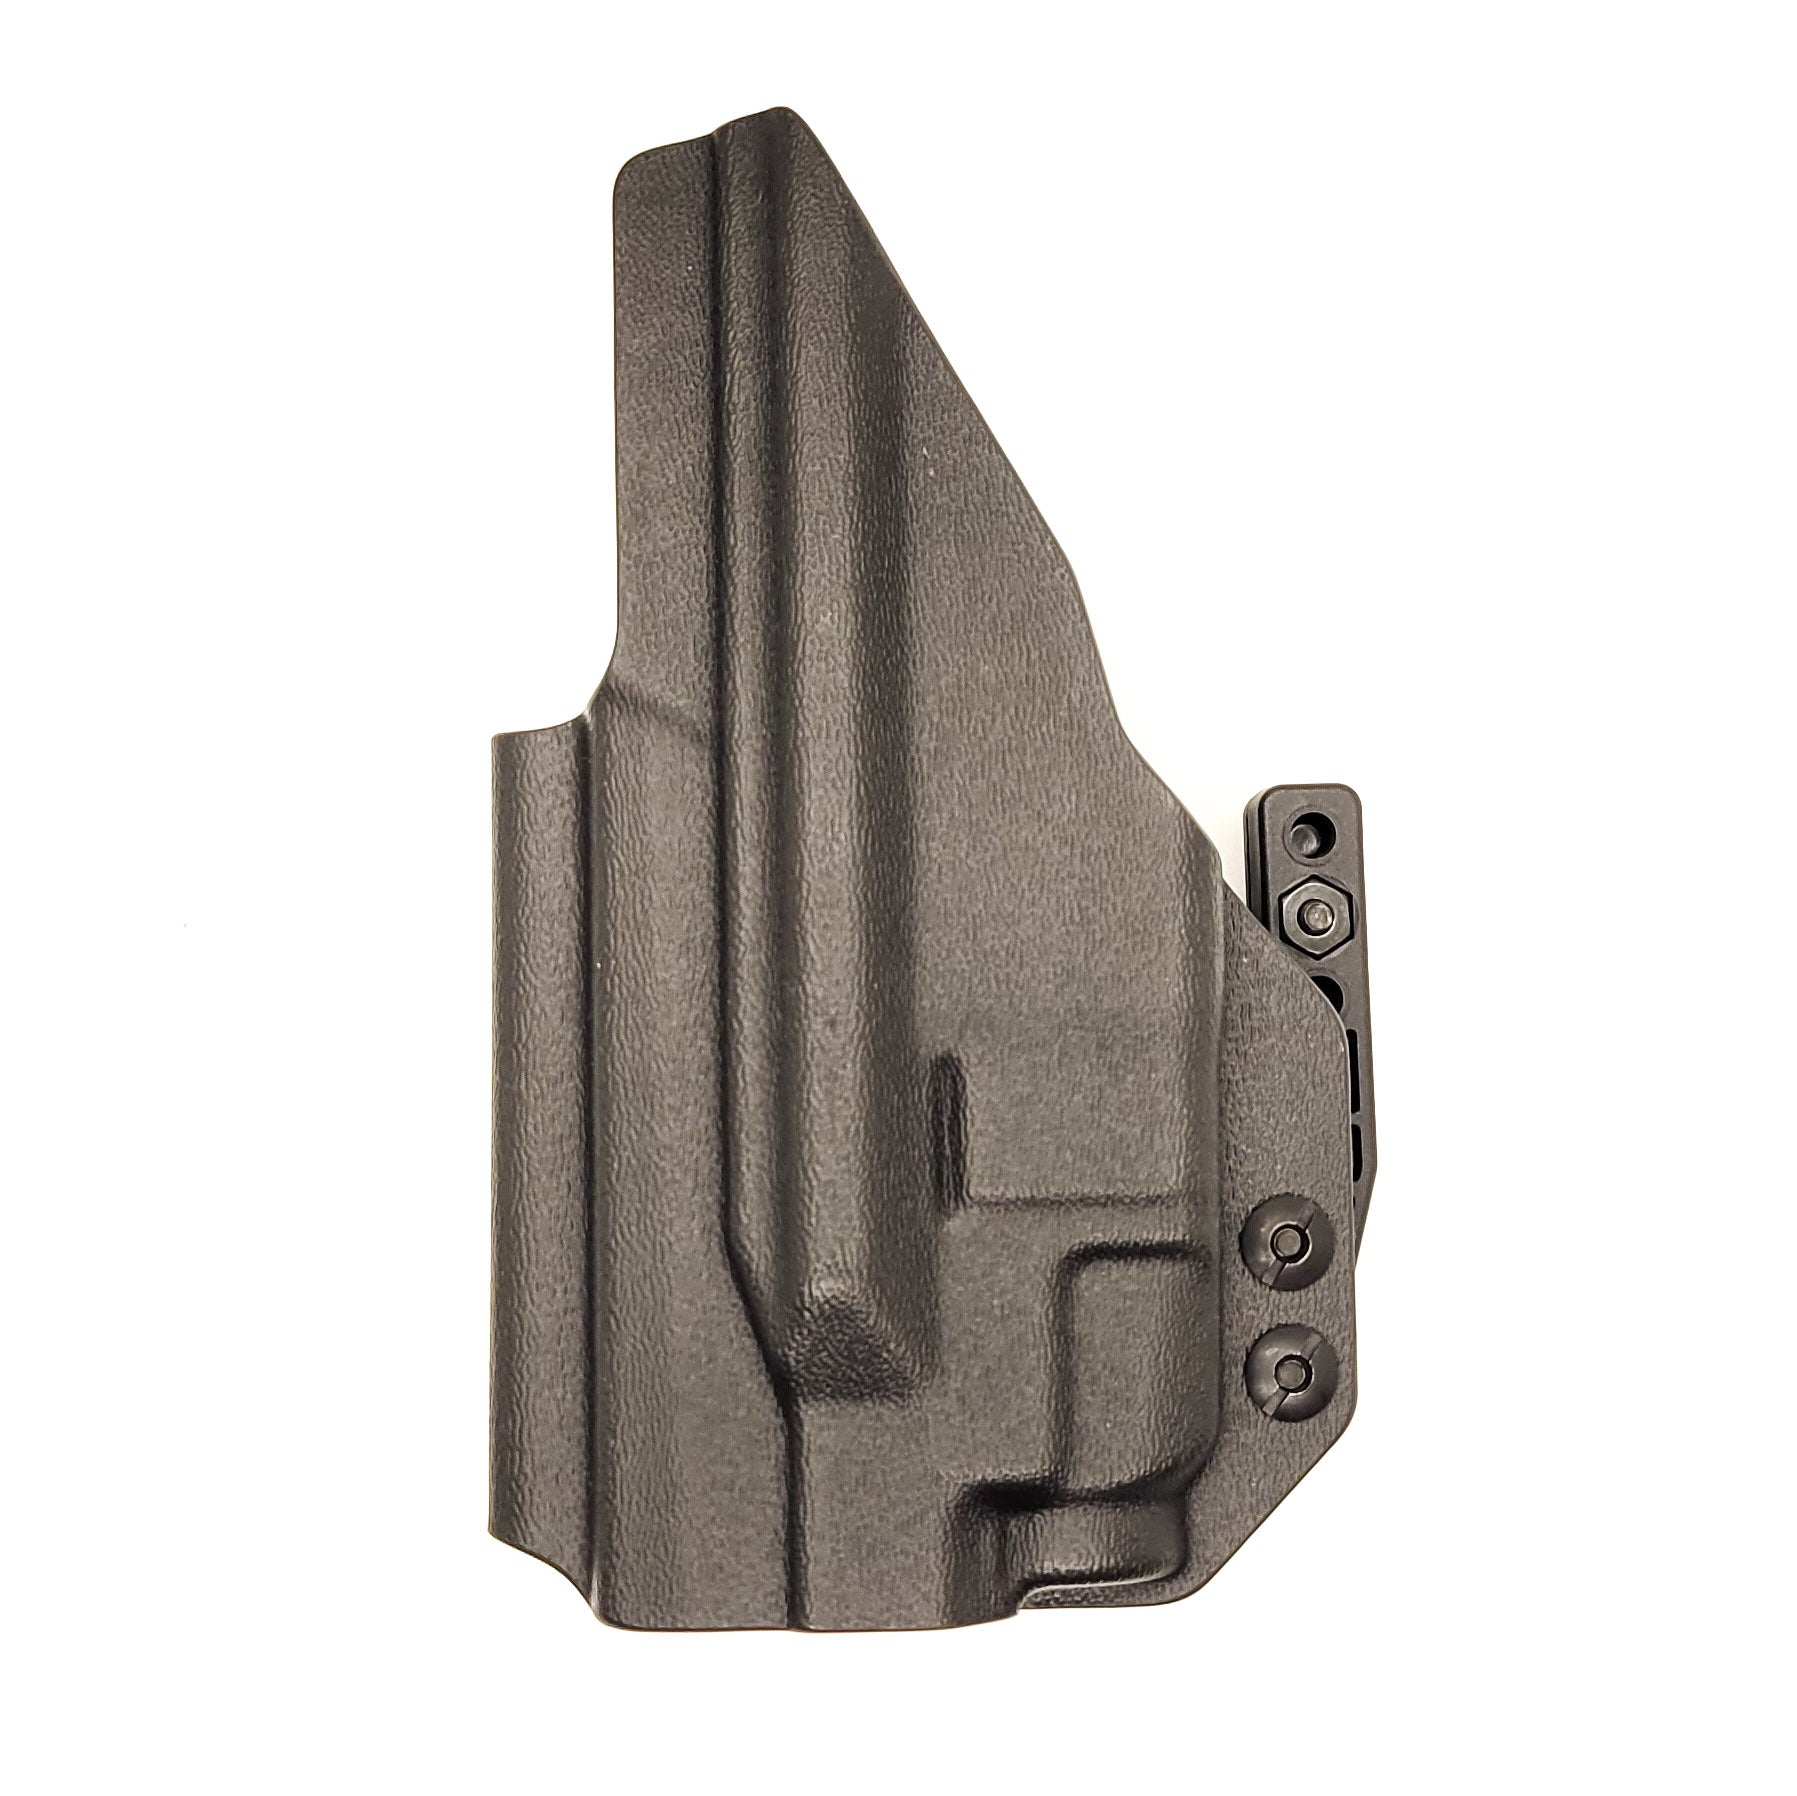 Inside waistband holster designed to fit the Sig Sauer P365 or P365XL pistol with the Tactical Development Pro Ledge Tactical Application Rail and Streamlight TLR-7 mounted to the weapon. This holster will fit the Sig P365, P365X, P365XL Spectre, P365 XL RomeoZero, P365X RomeoZero, P365 SAS and P365XL Spectre Comp.